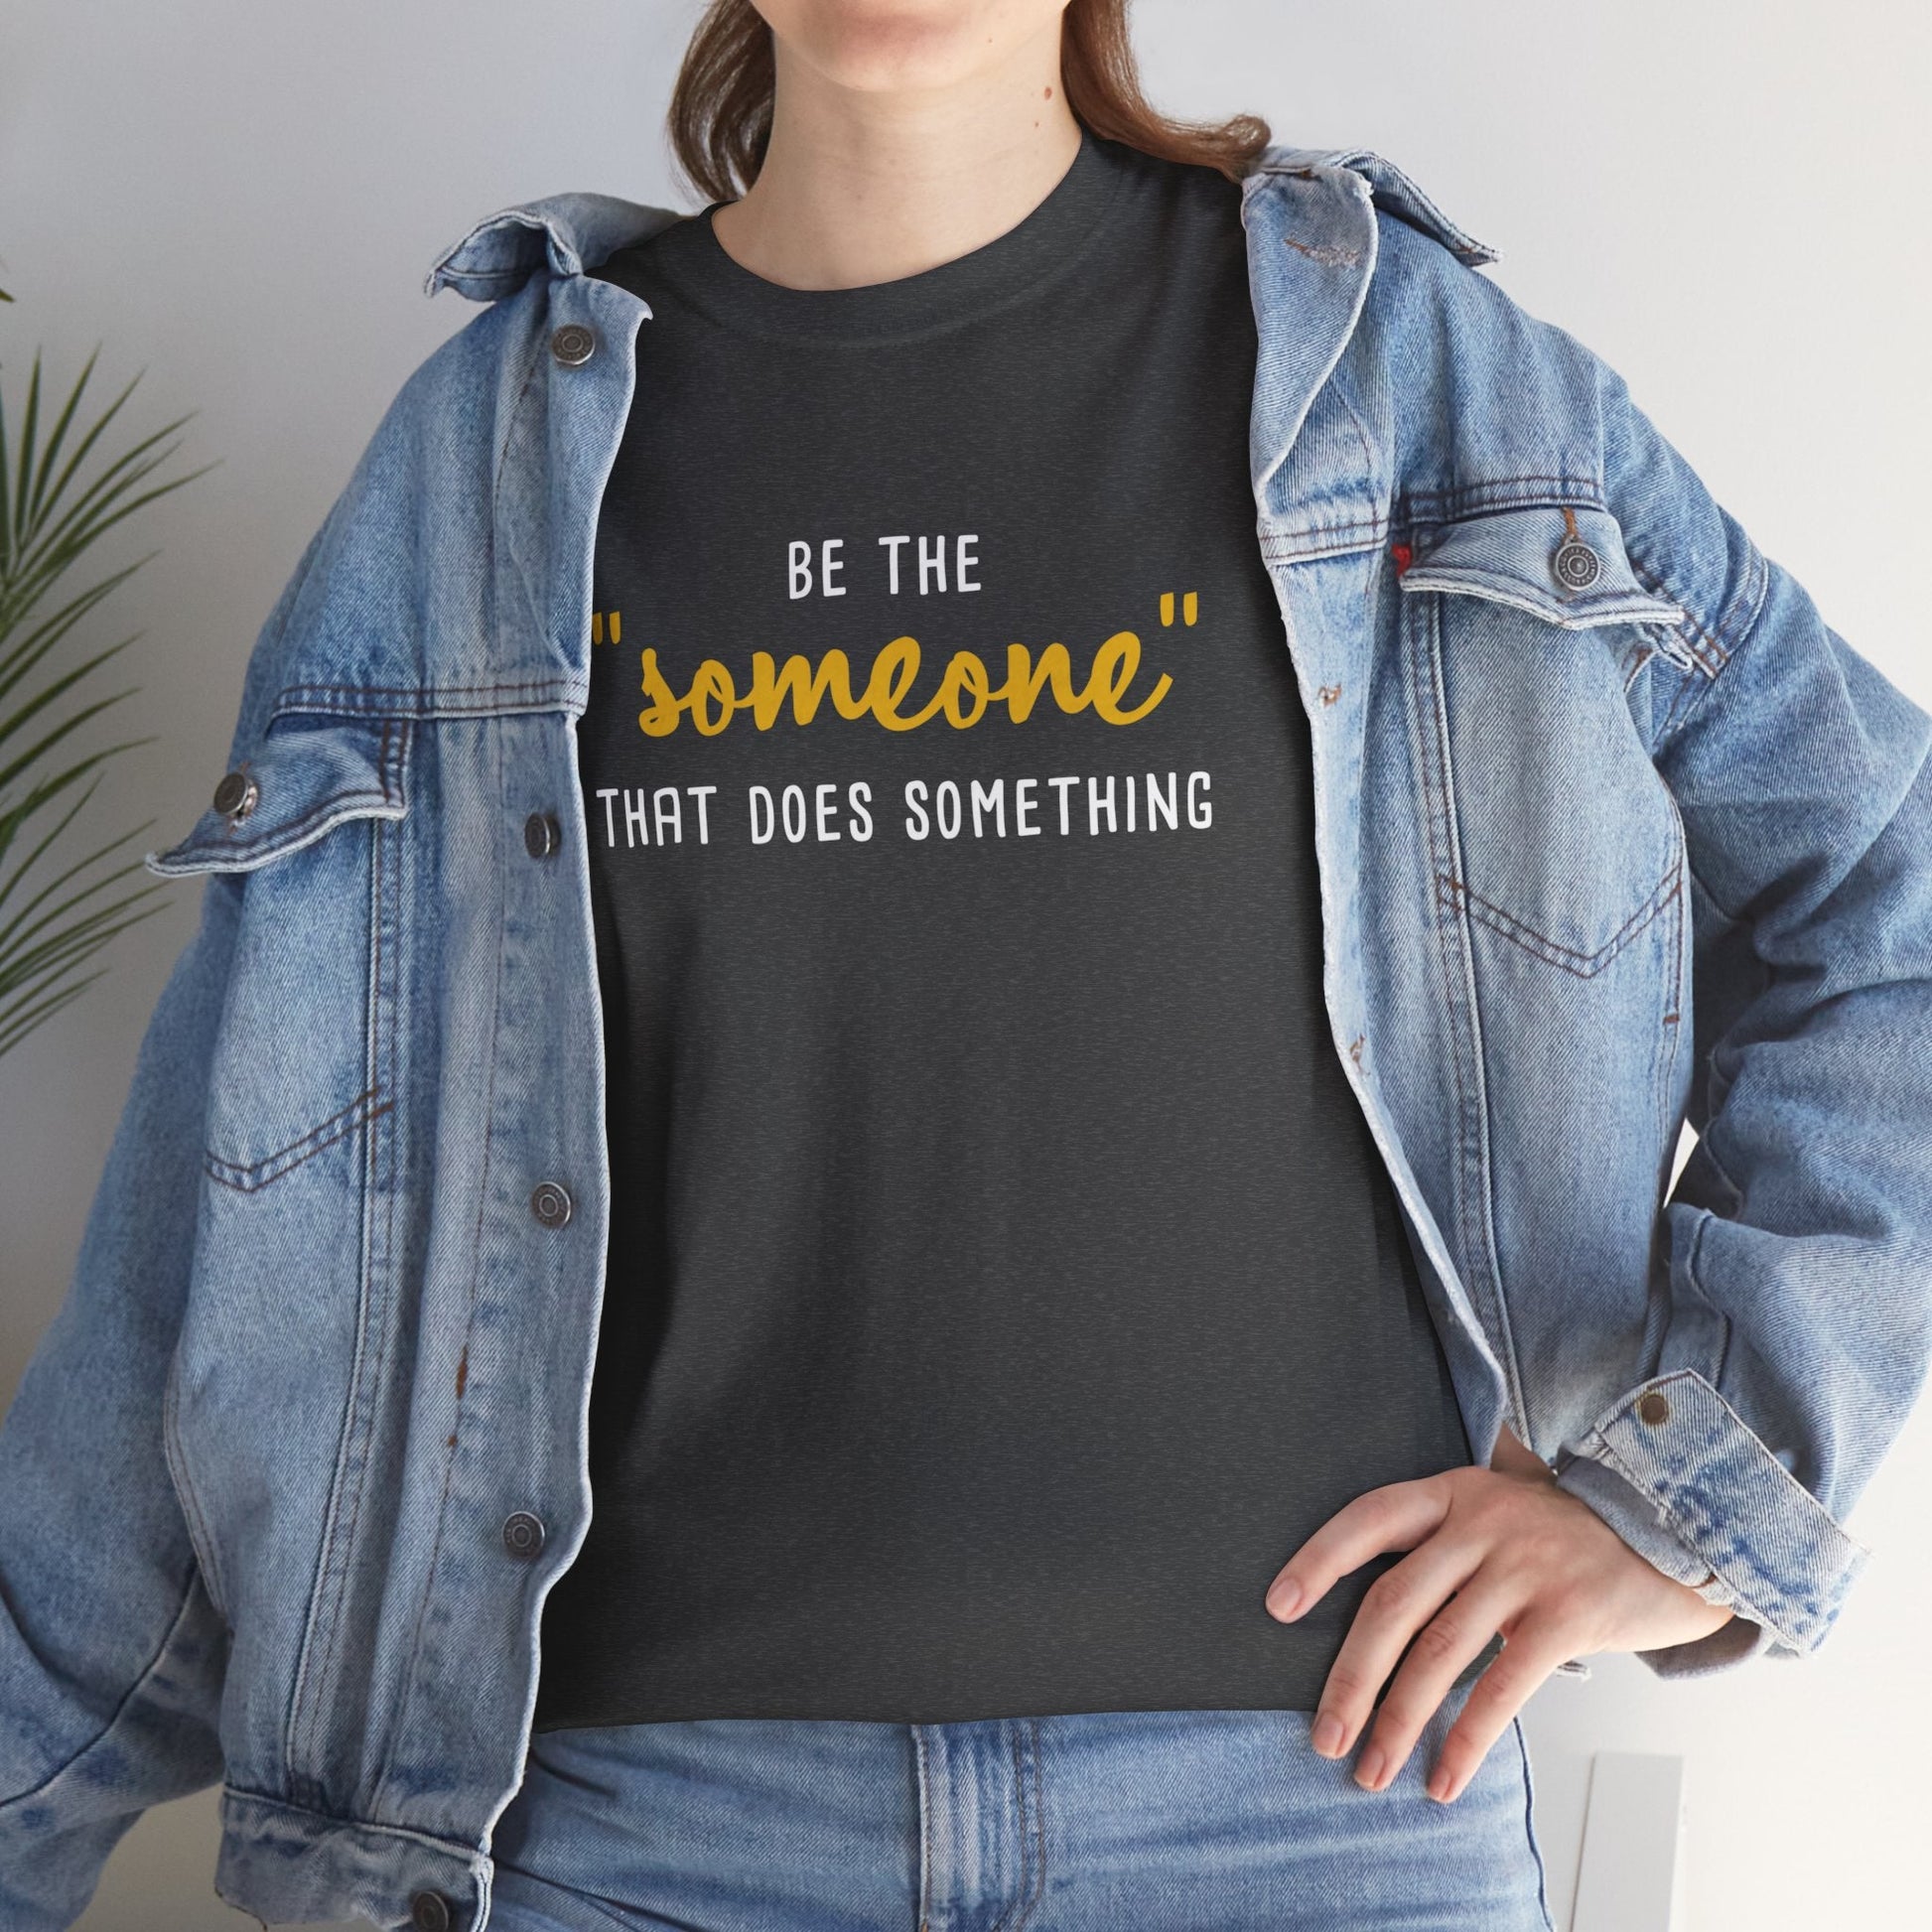 Be The "Someone" That Does Something | Text Tee - Detezi Designs-14735968339205739561